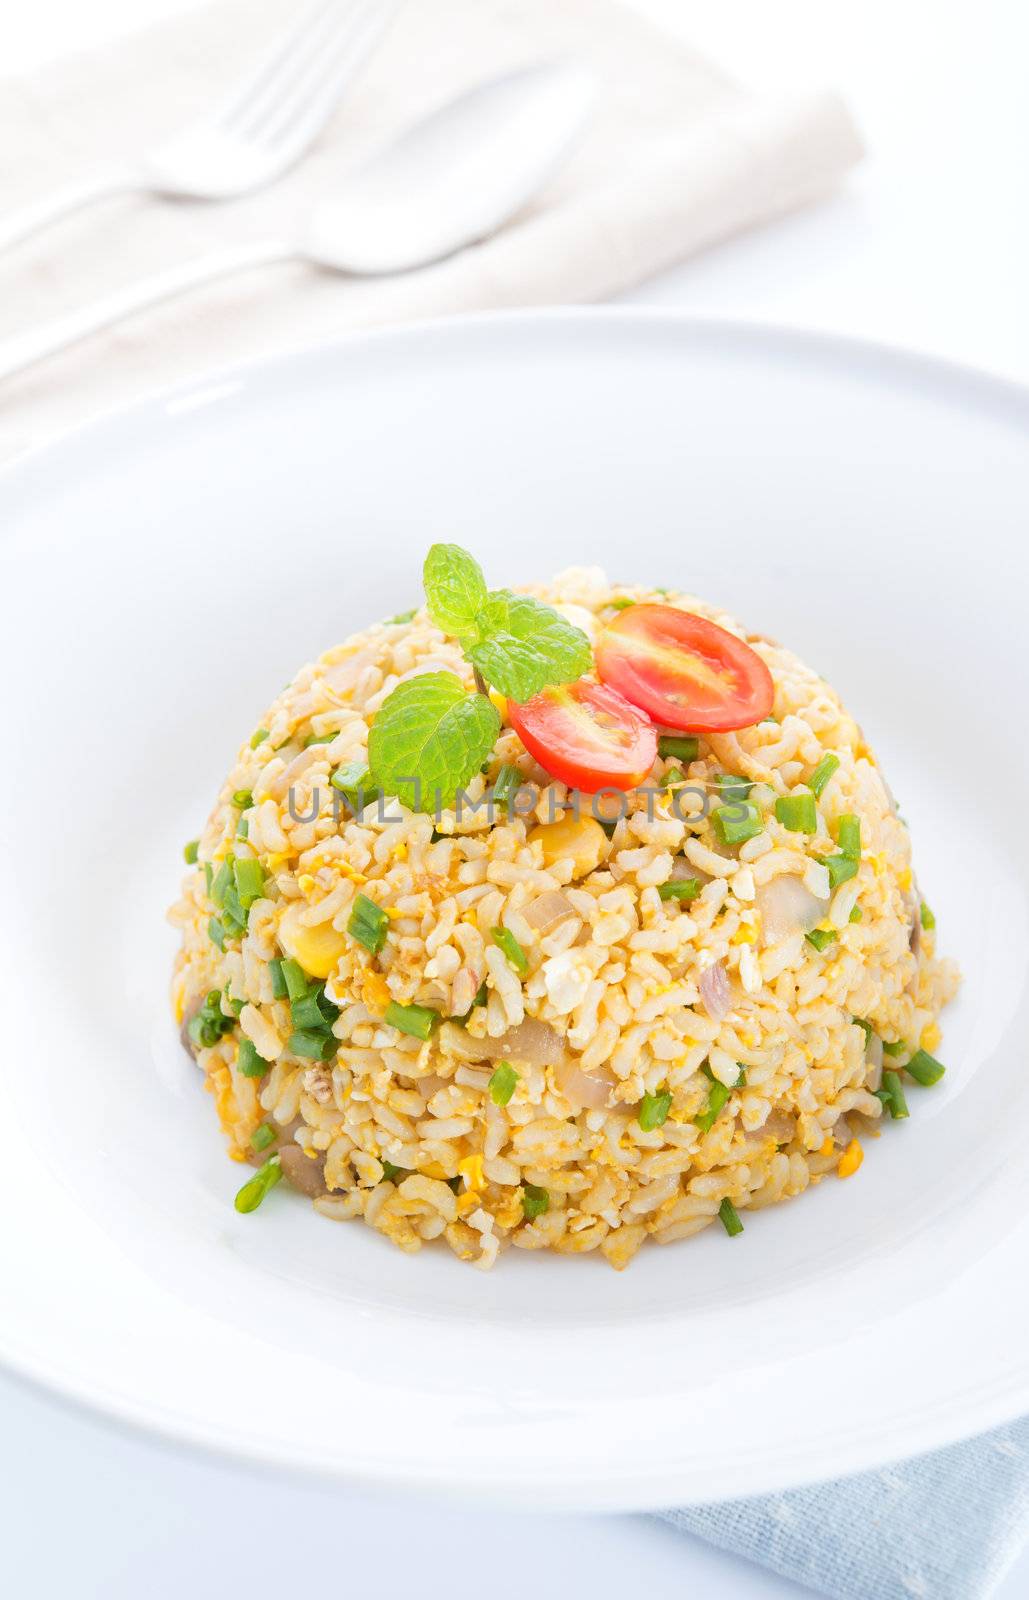 Chinese egg fried rice, Asian vegetarian cuisine ready to eat